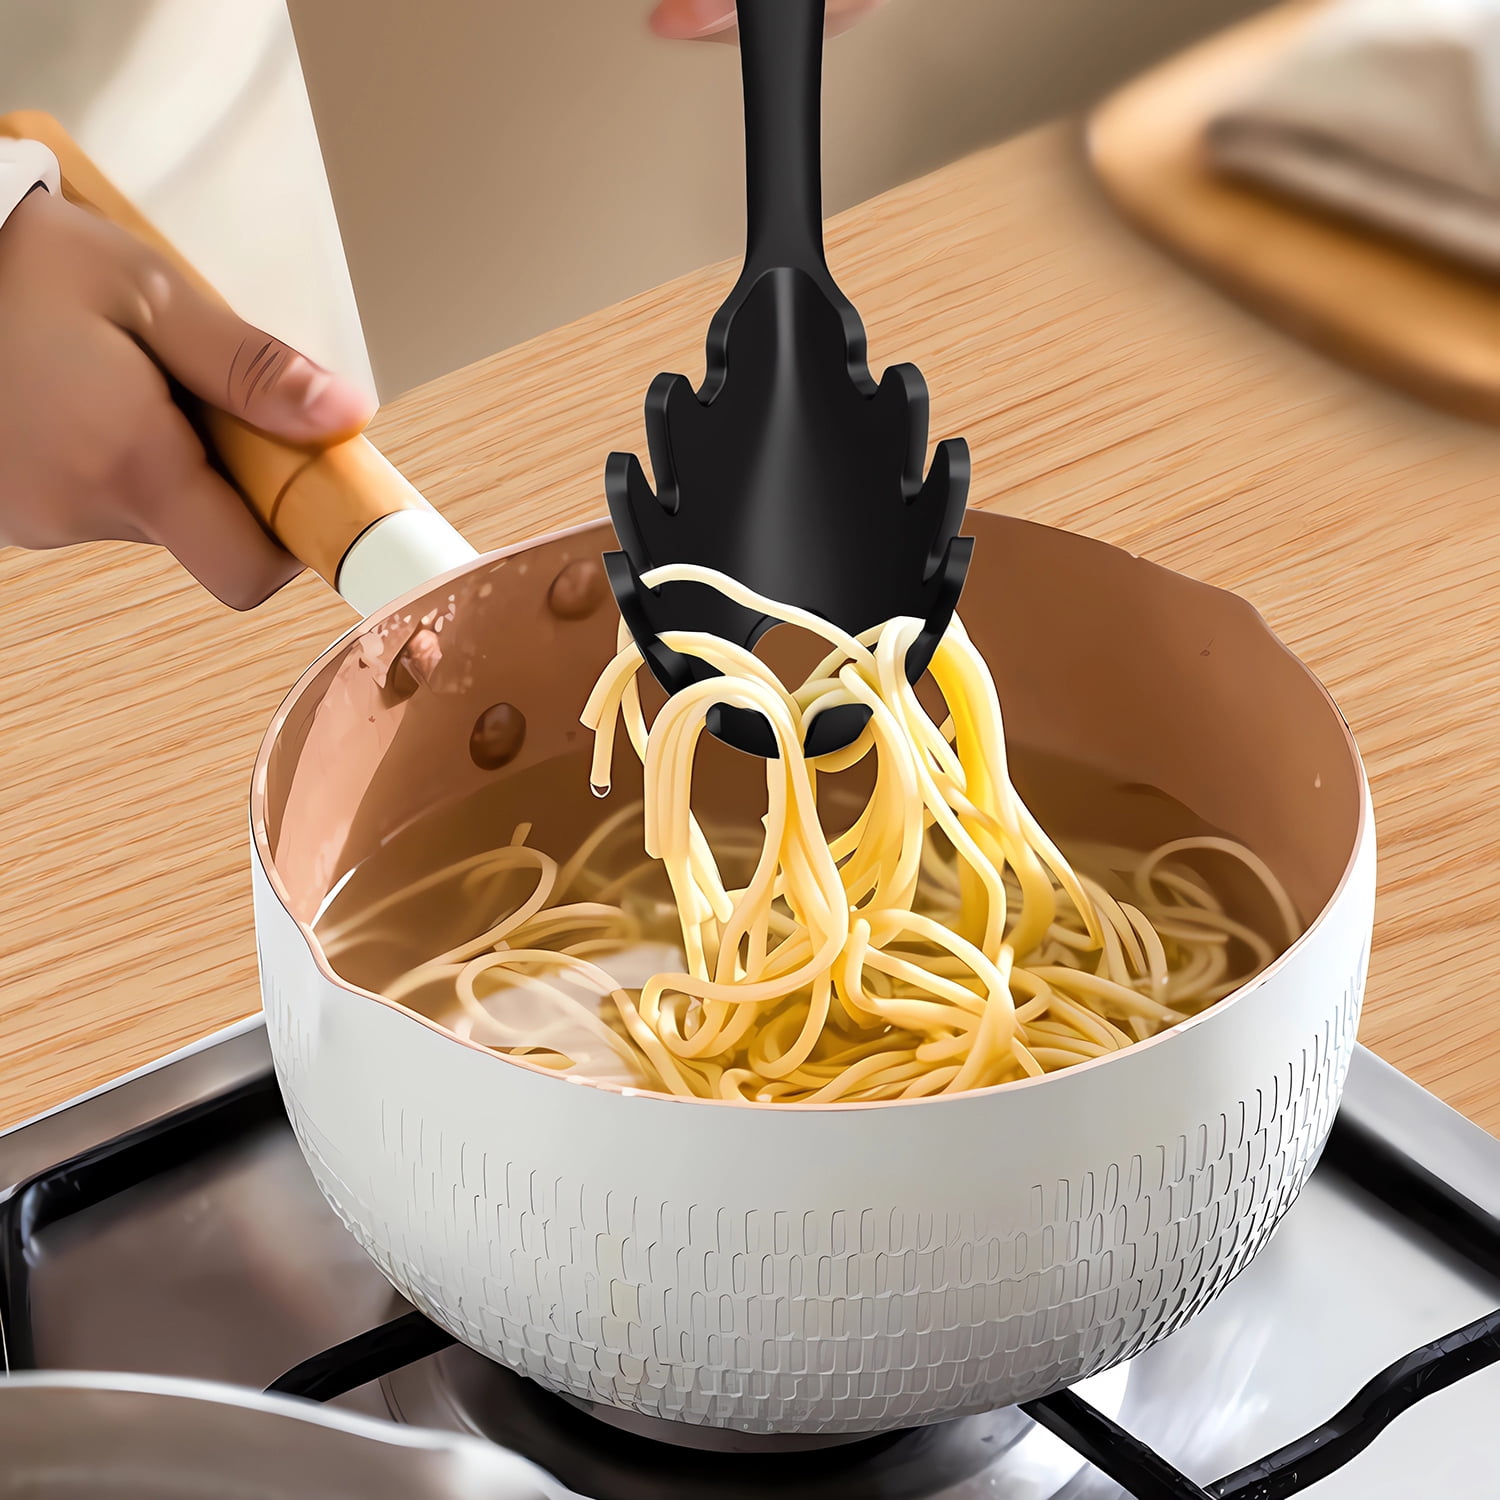 Silicone Cooking Utensils Set - 446°F Heat Resistant Silicone Kitchen  Utensils for Cooking,Kitchen U…See more Silicone Cooking Utensils Set -  446°F